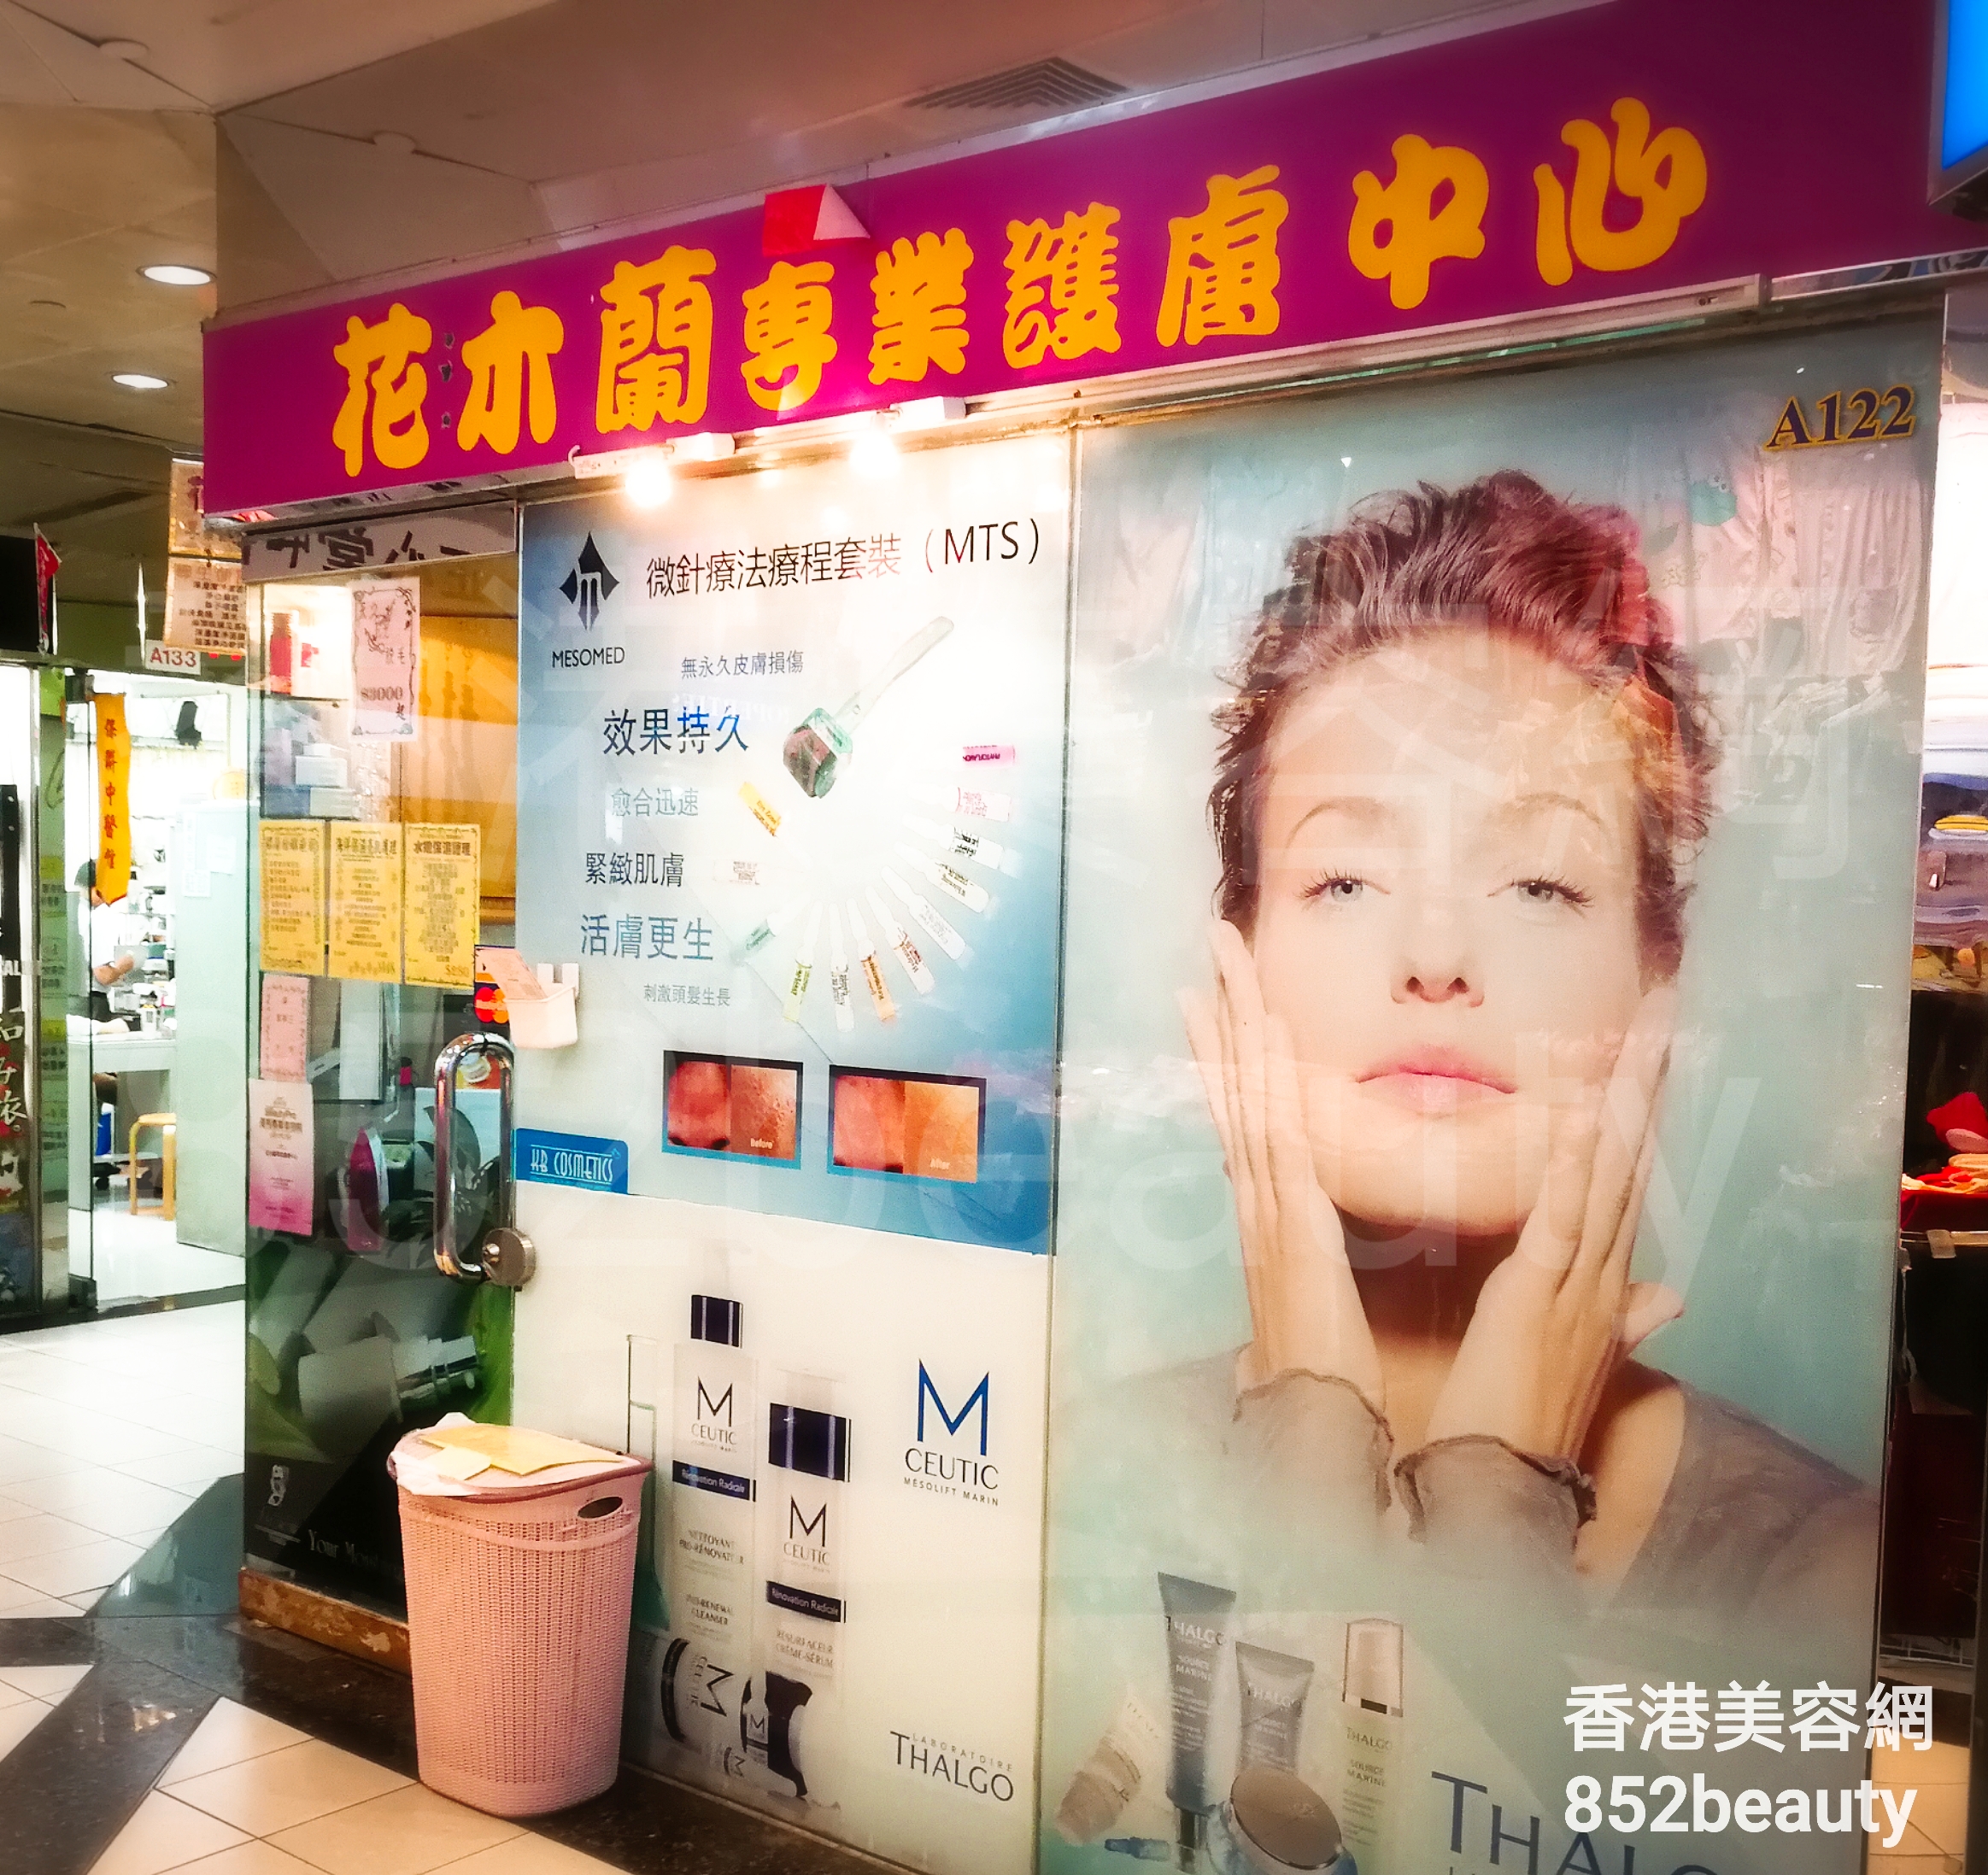 Hand and foot care: 花木蘭 專業護膚中心